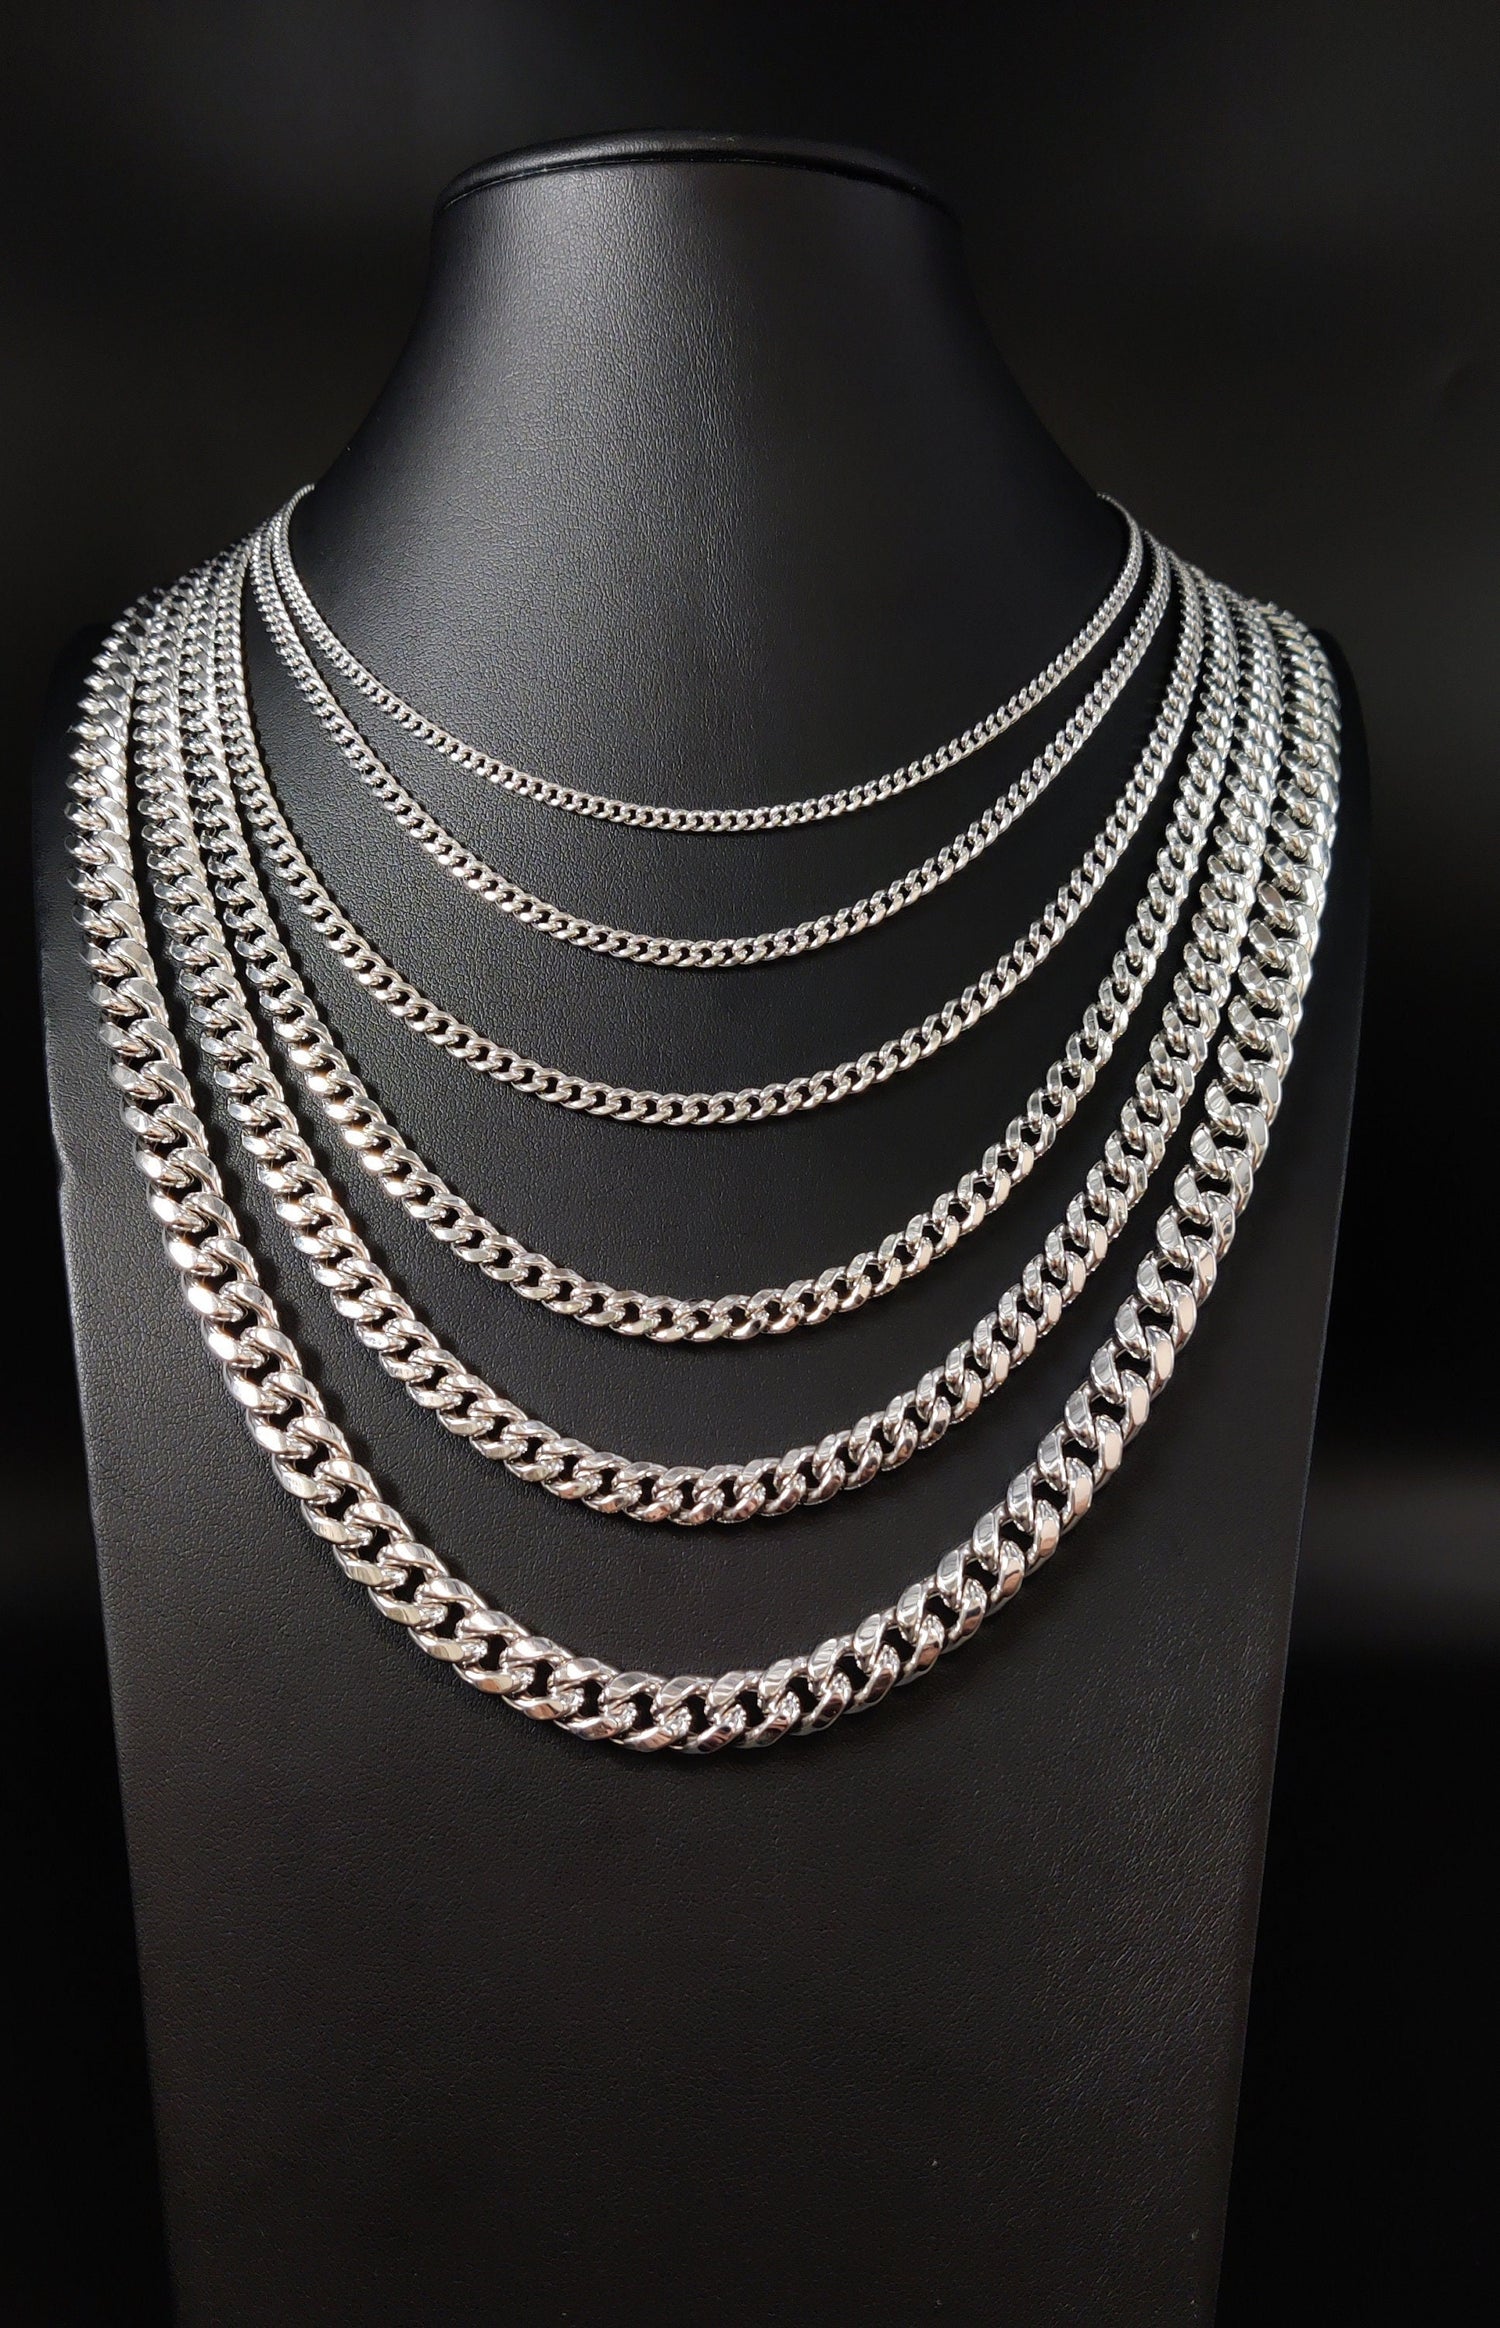 10K White Gold Cable Link Womens Chain 1.5 mm 18 Inches